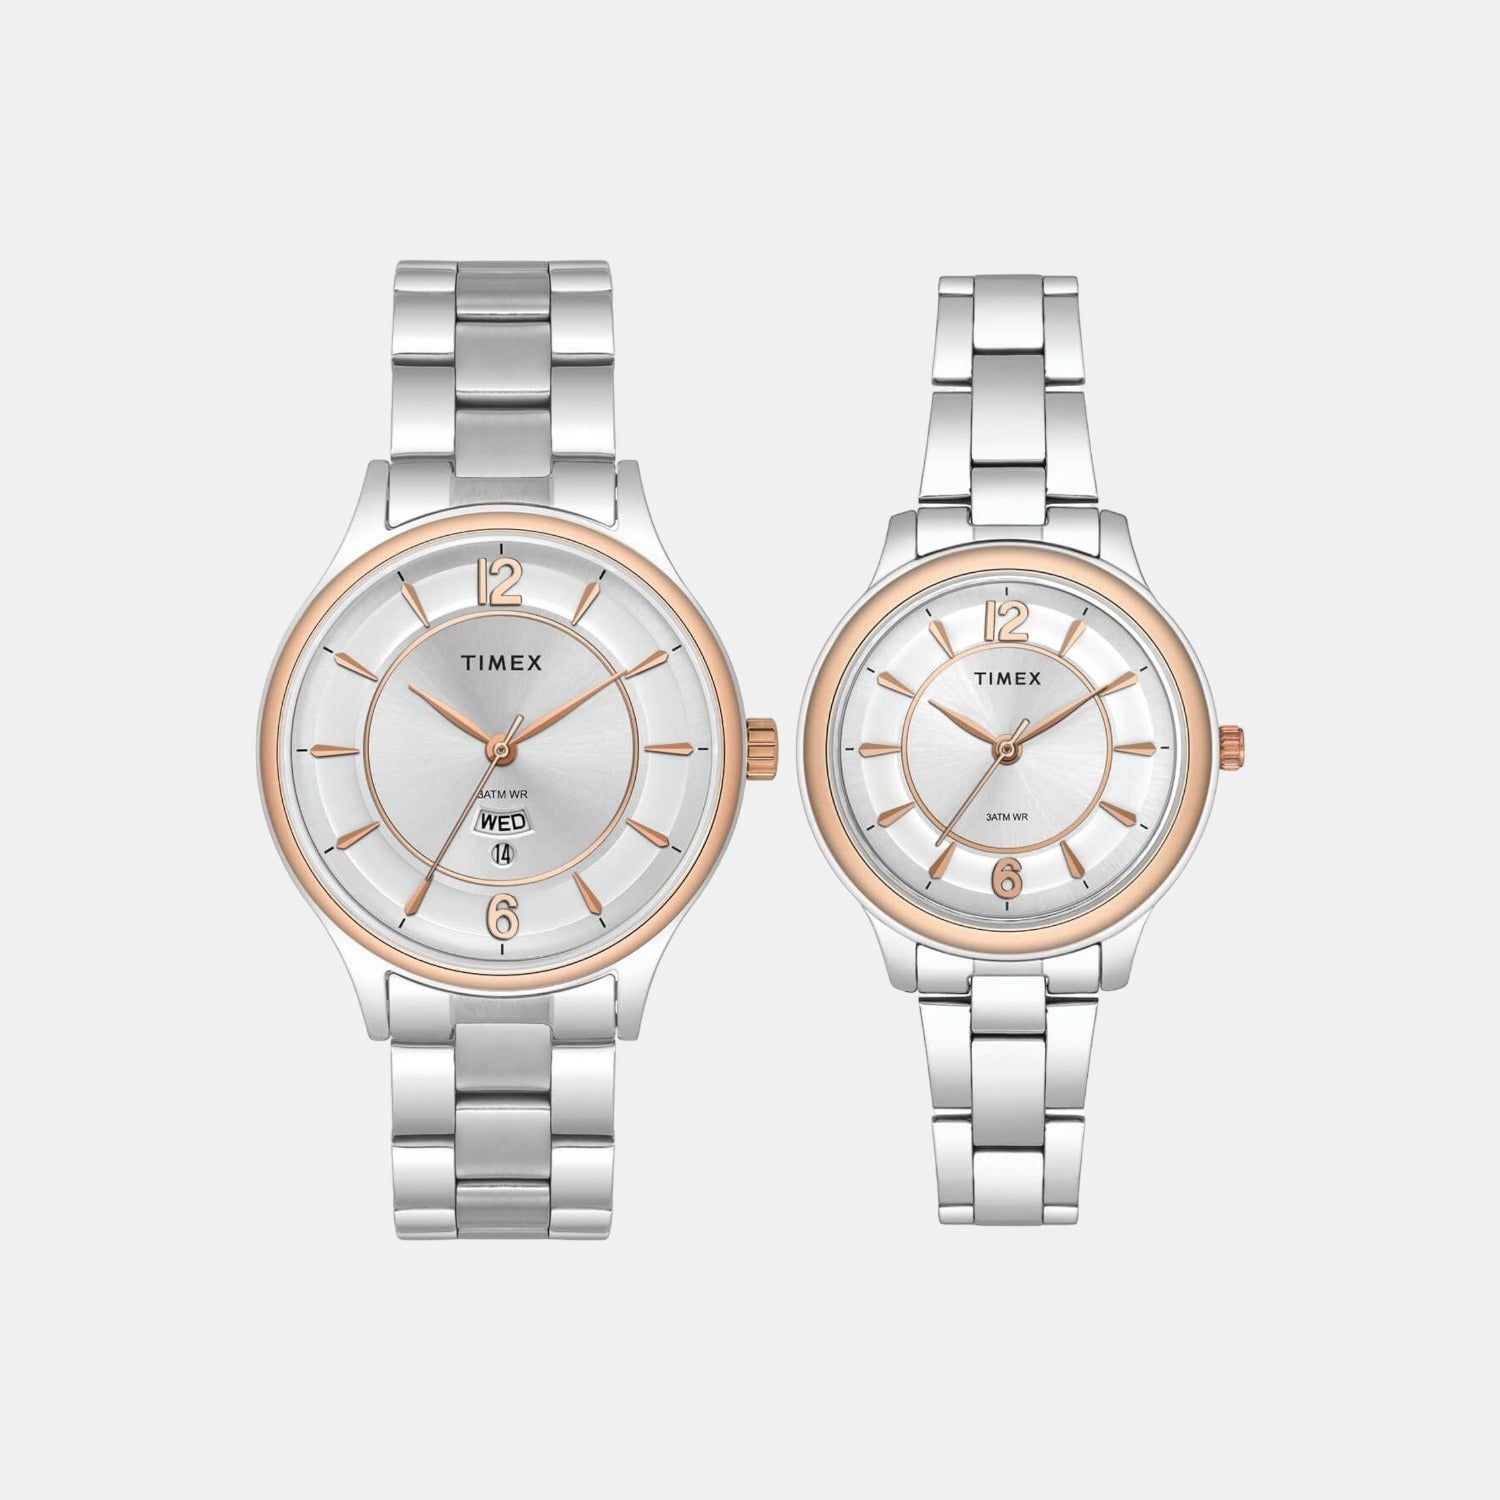 Buy Unisex Automatic Watch Couple Watch Waterproof Luxury Watches Online at  Lowest Price Ever in India | Check Reviews & Ratings - Shop The World